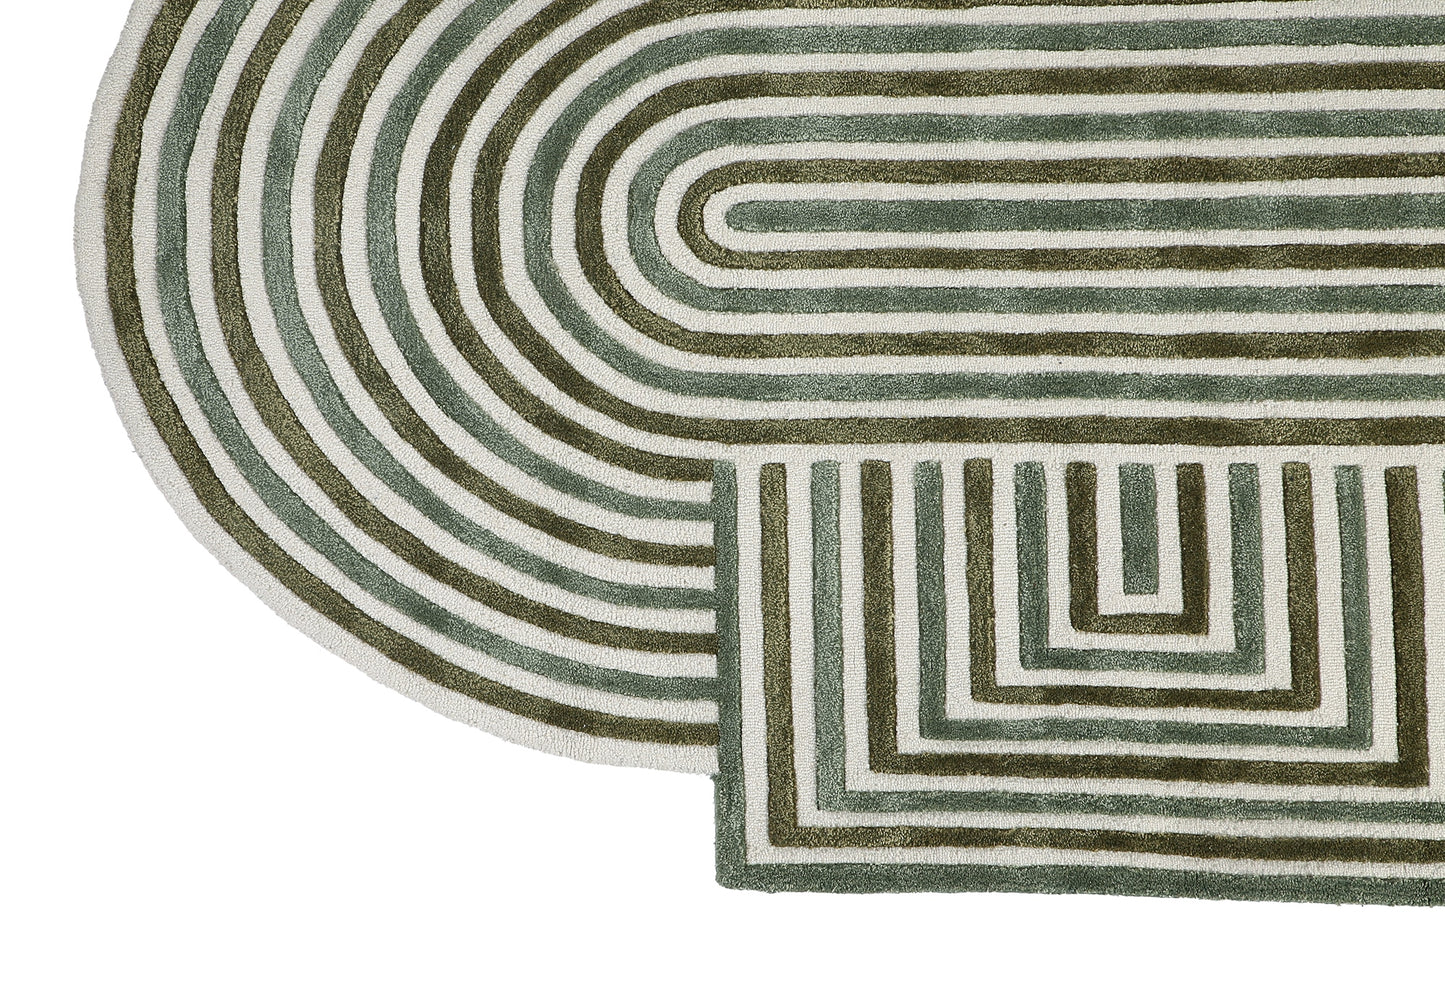 Olive and Natural Oval  Hand Woven Wool Rug - 5'x8'